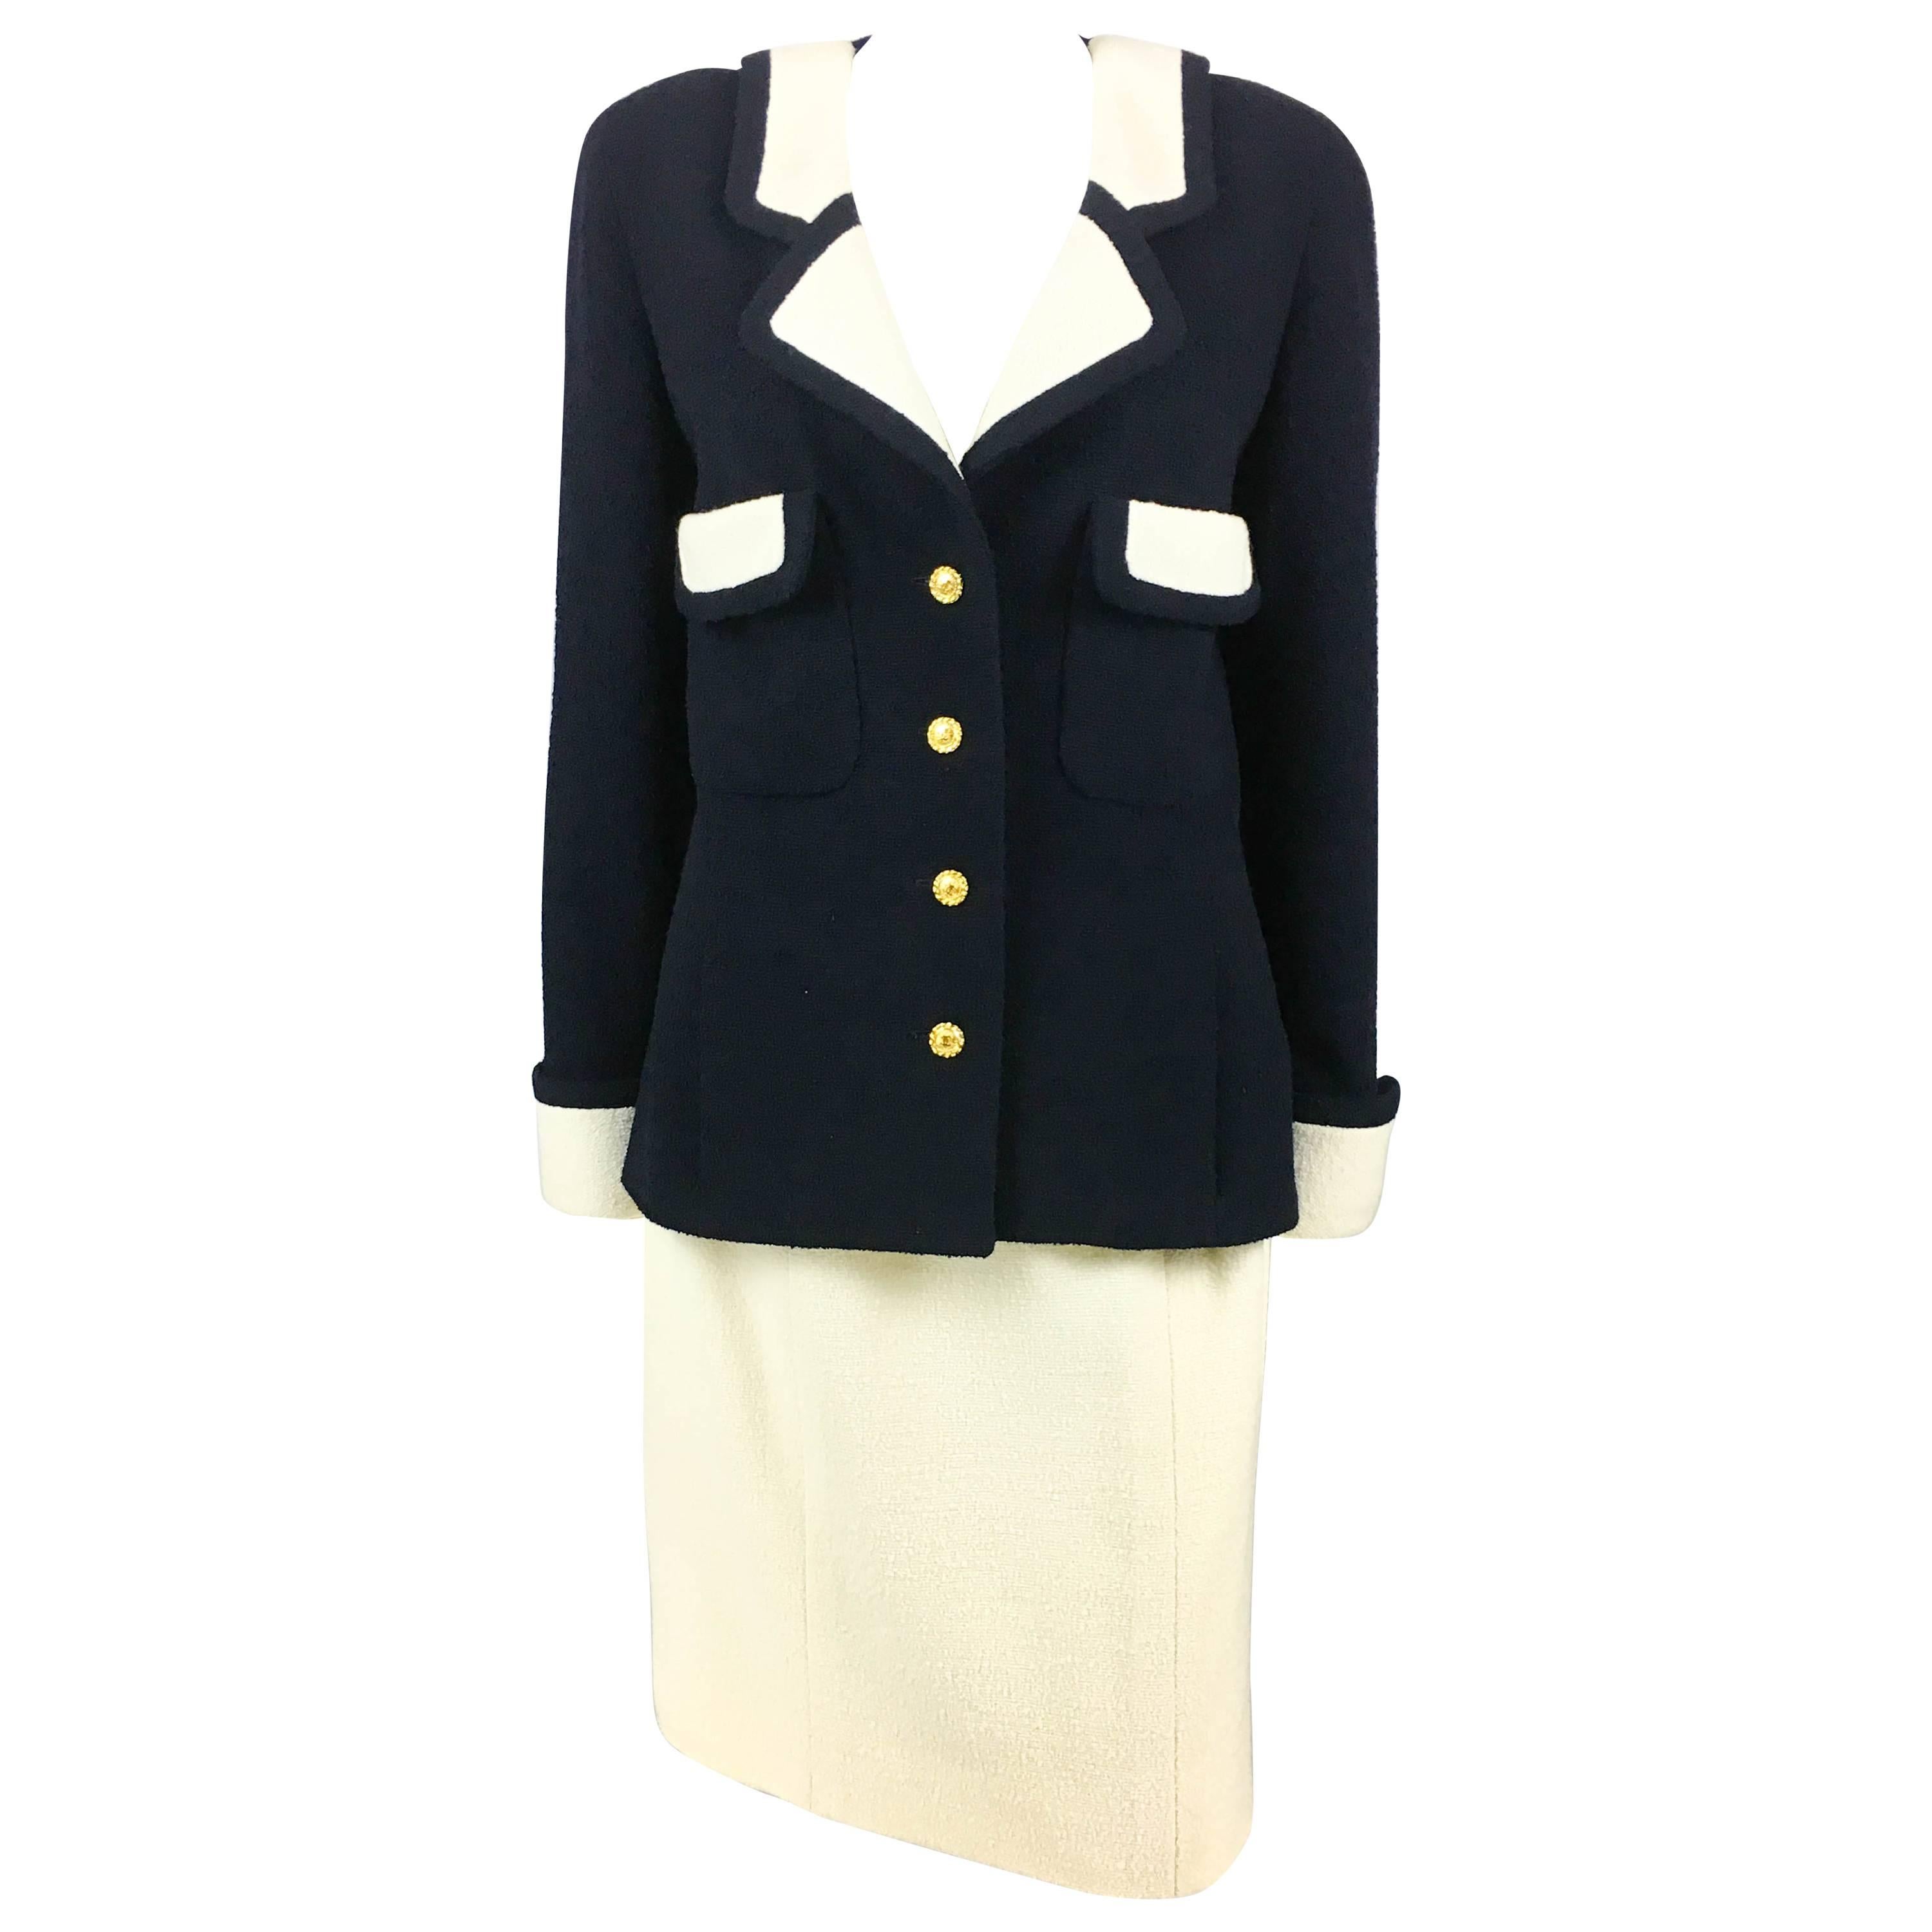 Chanel Nautical Inspired Navy and White Wool Skirt Suit, Circa 1982